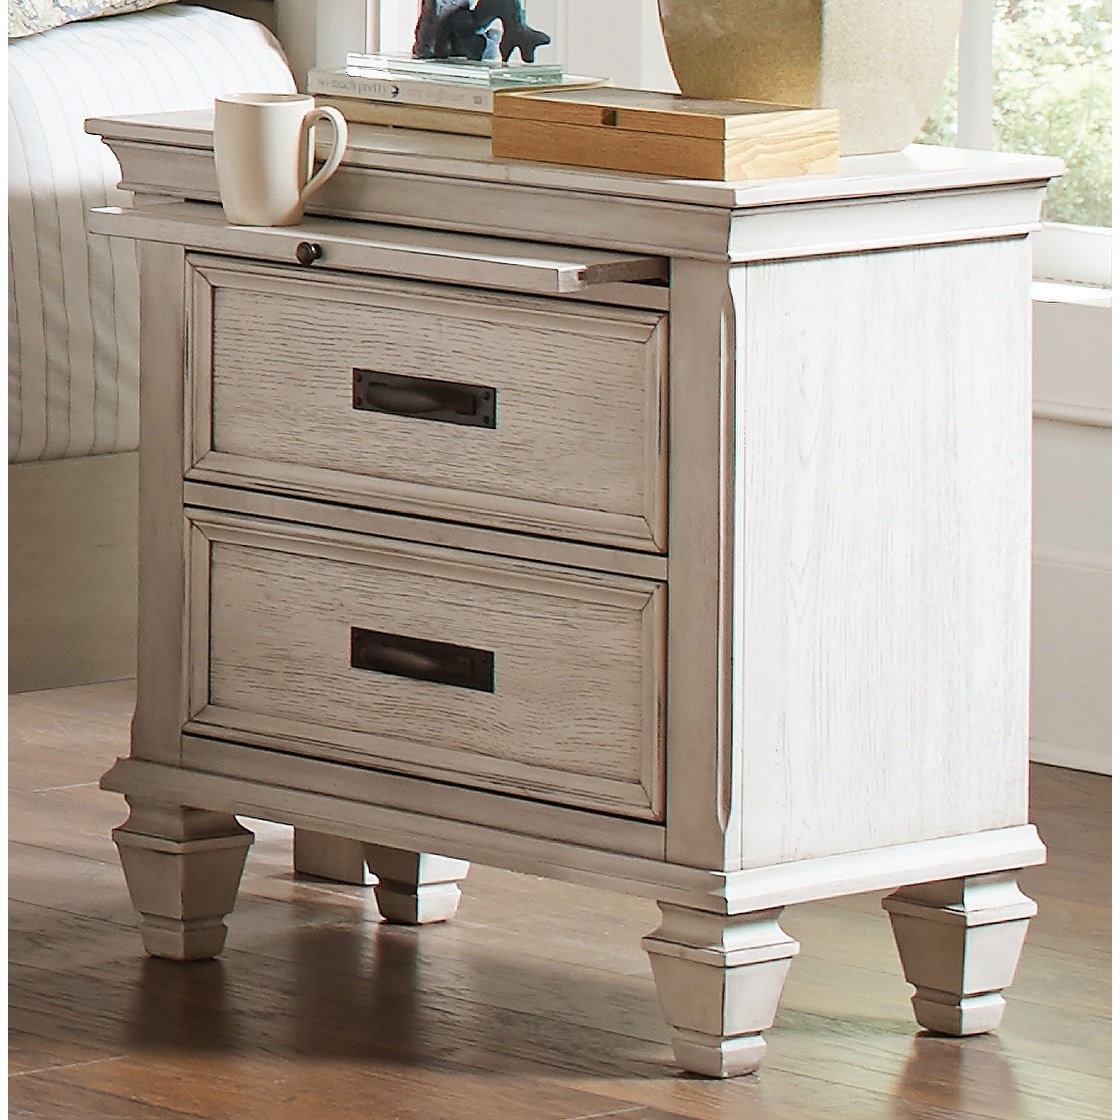 Franco Antique White 2drawer Nightstand with Tray Antique White 28" x